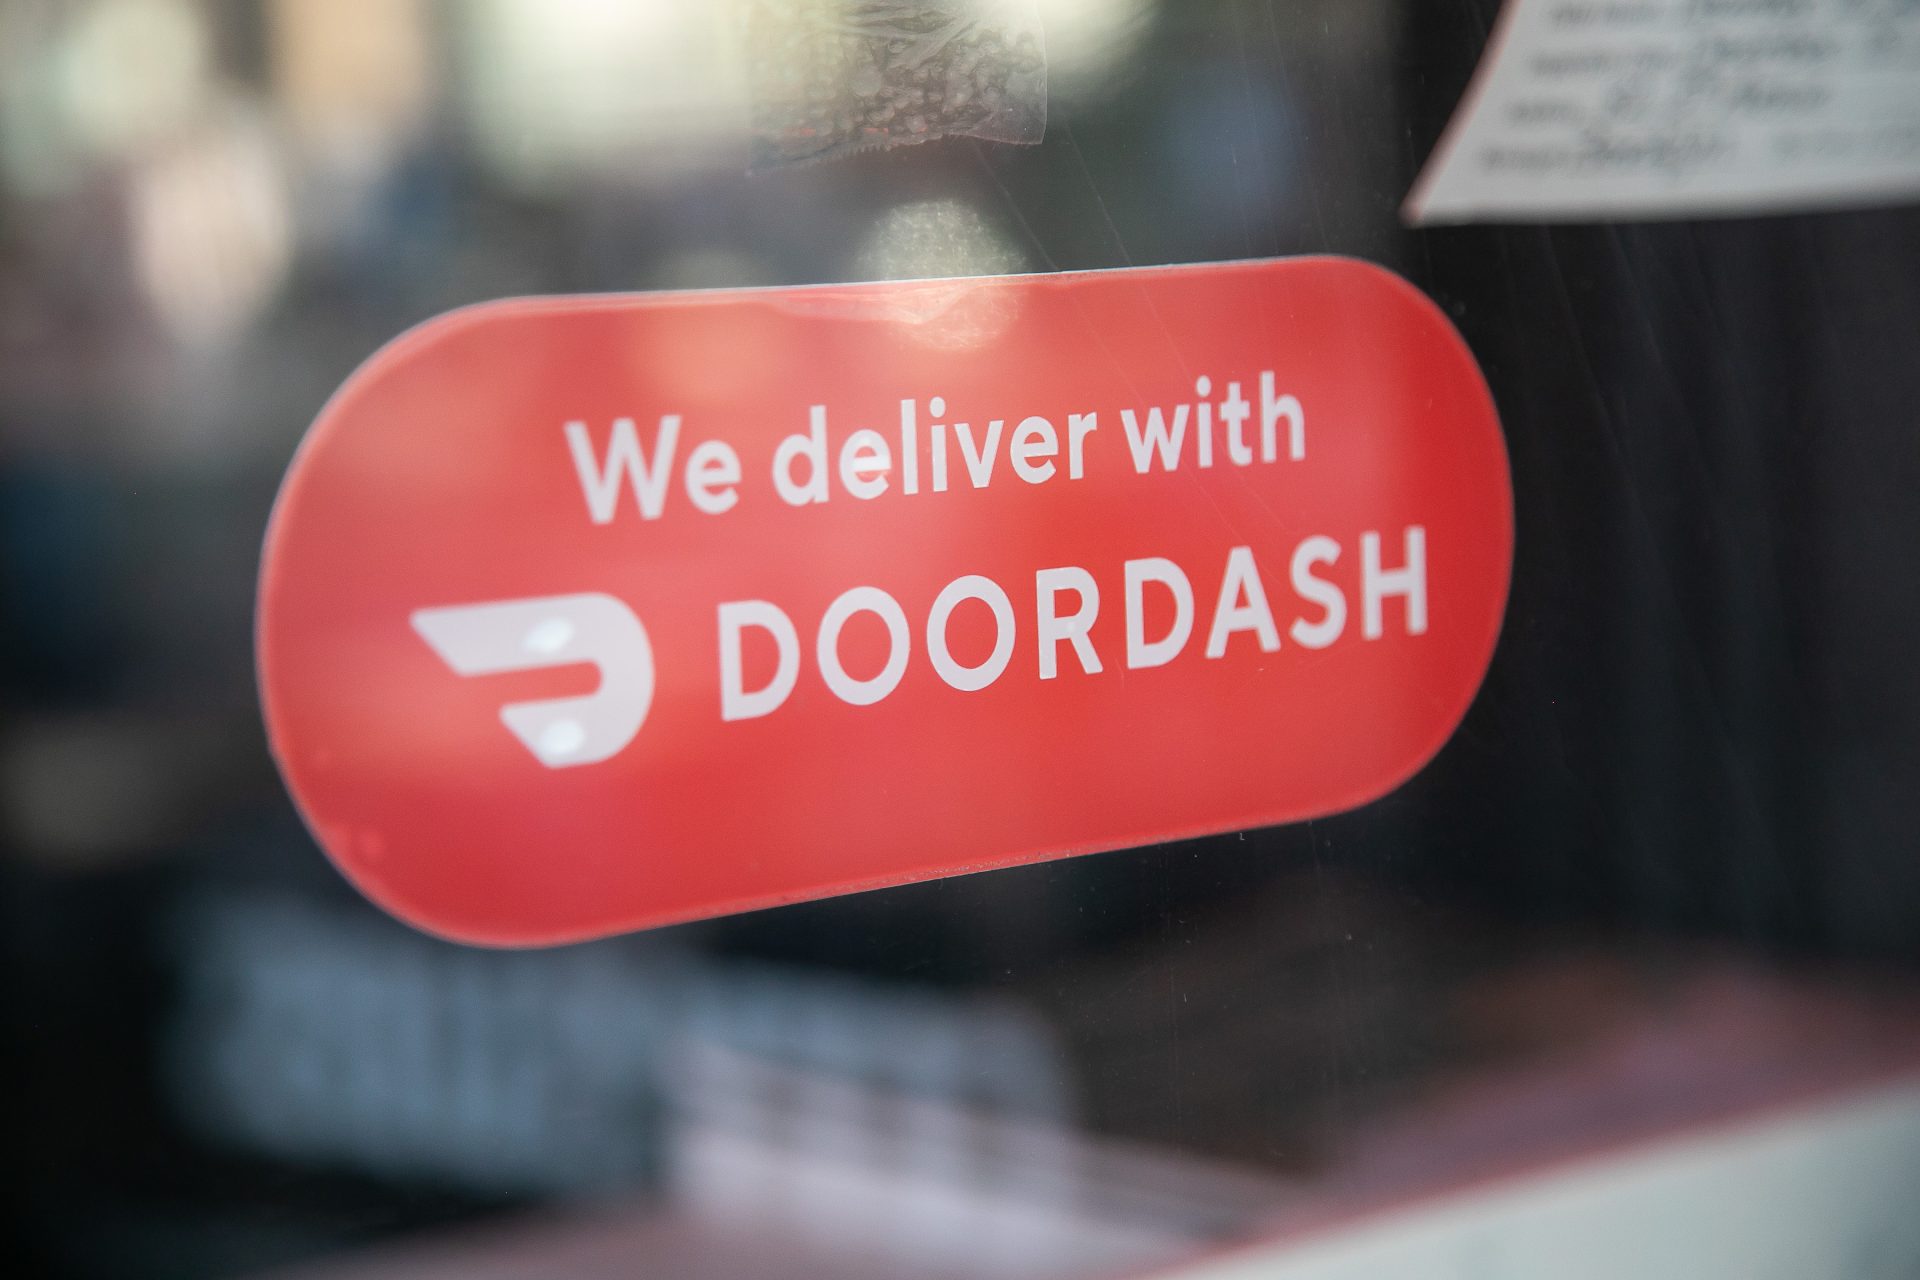 DoorDash Warns Customers About Delays For Deliveries w/o Tips